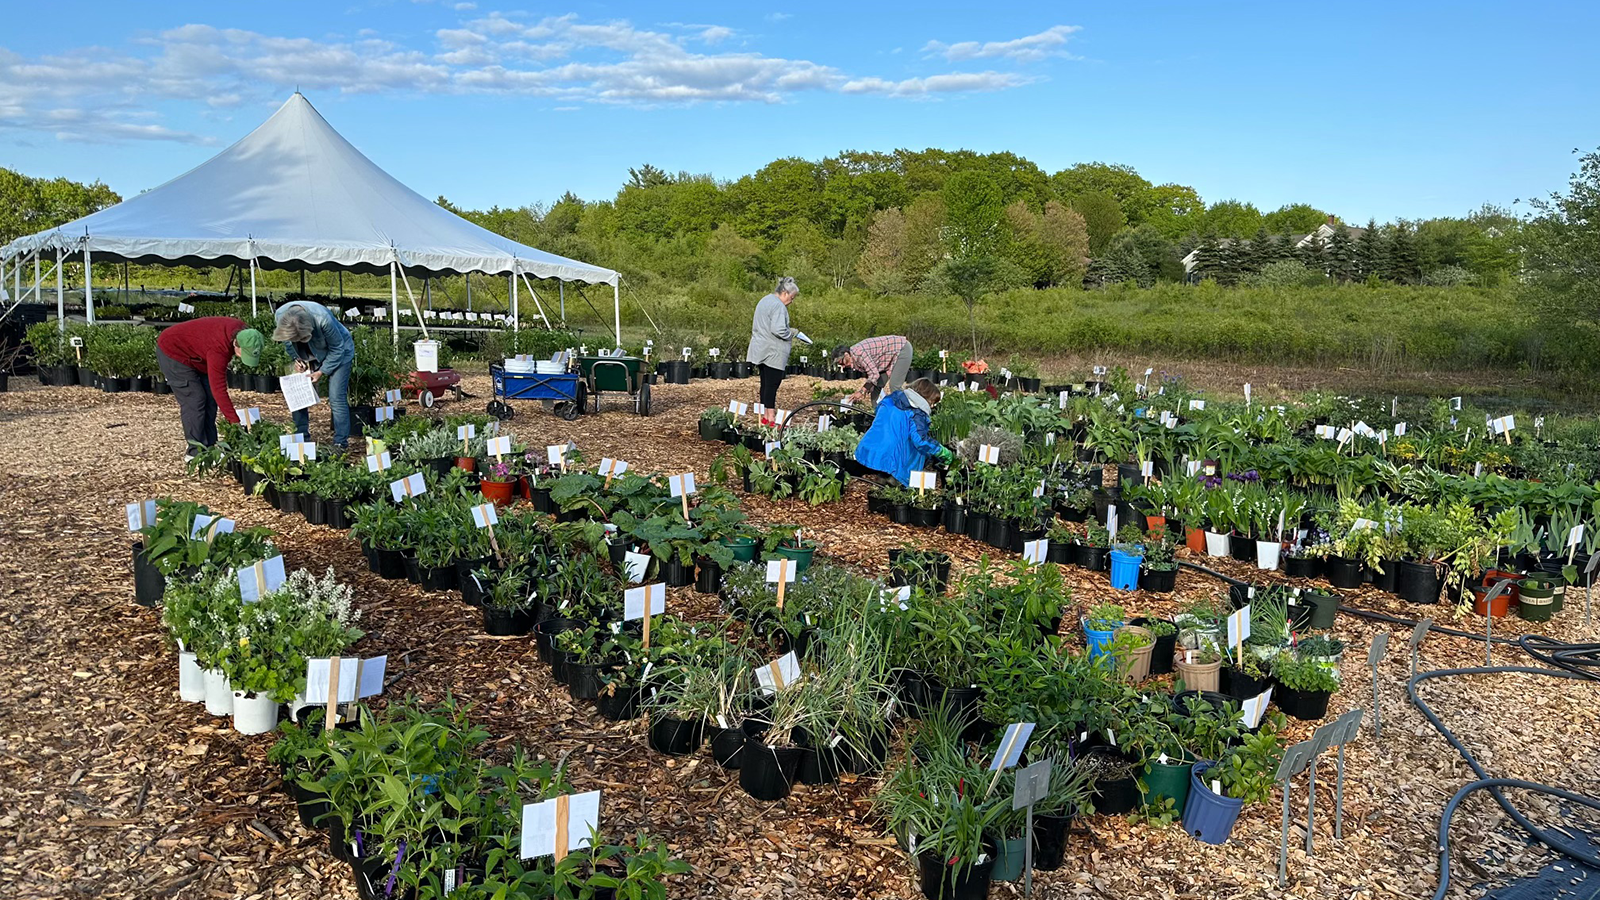 shoppers attend the Cumberland County Plant Sale at Tidewater Farm to buy plants